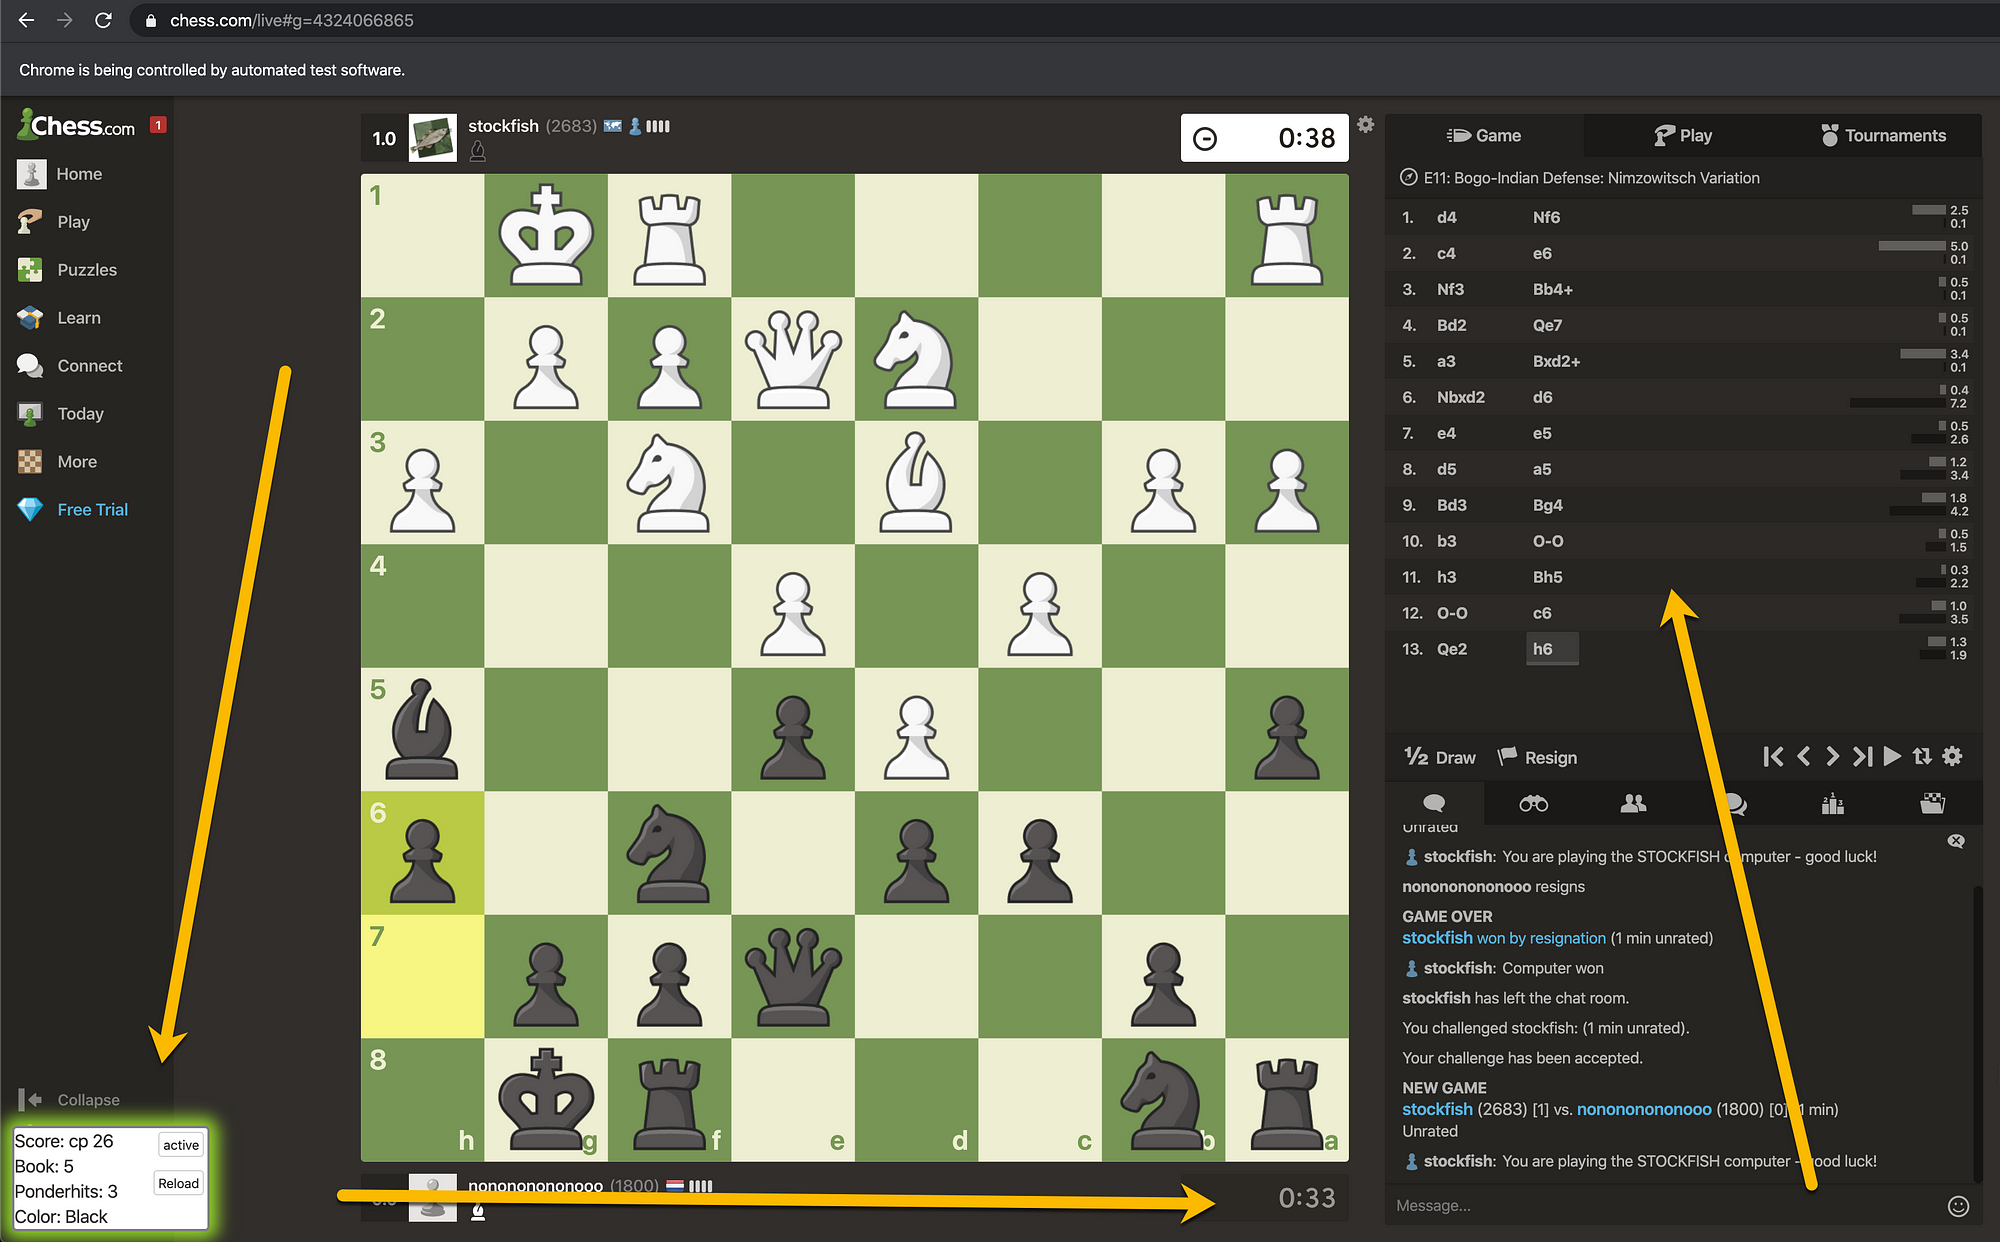 Programming a chess bot for Chess.com, by Lucas Calje, The Startup